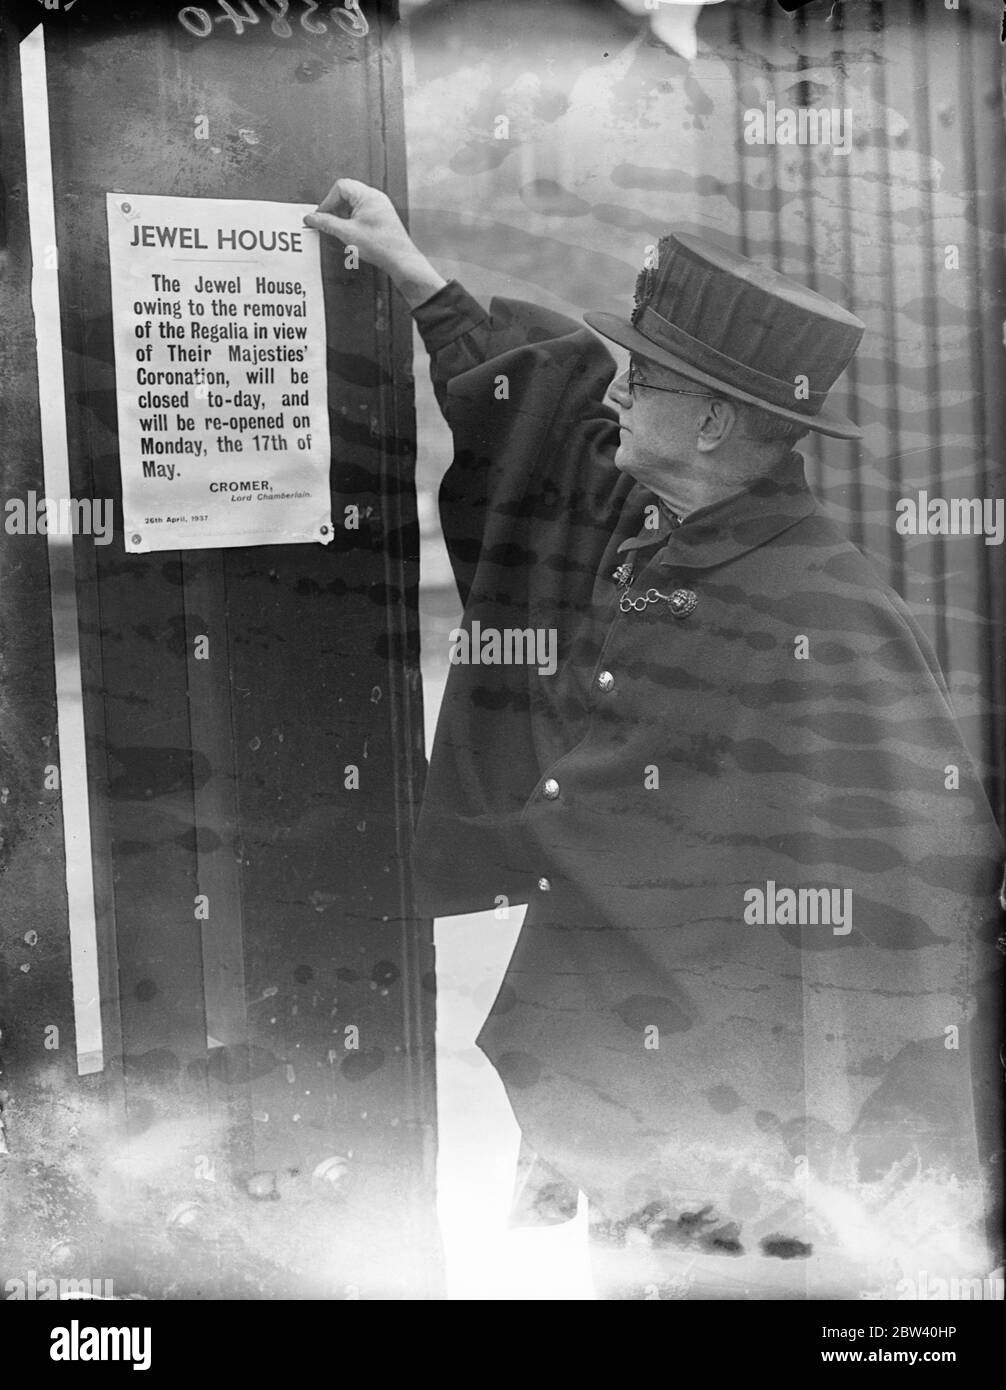 Wakefield Tower closed as Crown Jewels are removed for Coronation. Owing to the removal of the Crown Jewels for the Coronation, the Wakefield Tower at the Tower of London is being closed to the public until the middle of May. Photo shows: a Yeoman Warden pinning up the notice announcing the closing of the Jewel House at the Tower. 26 April 1937 Stock Photo